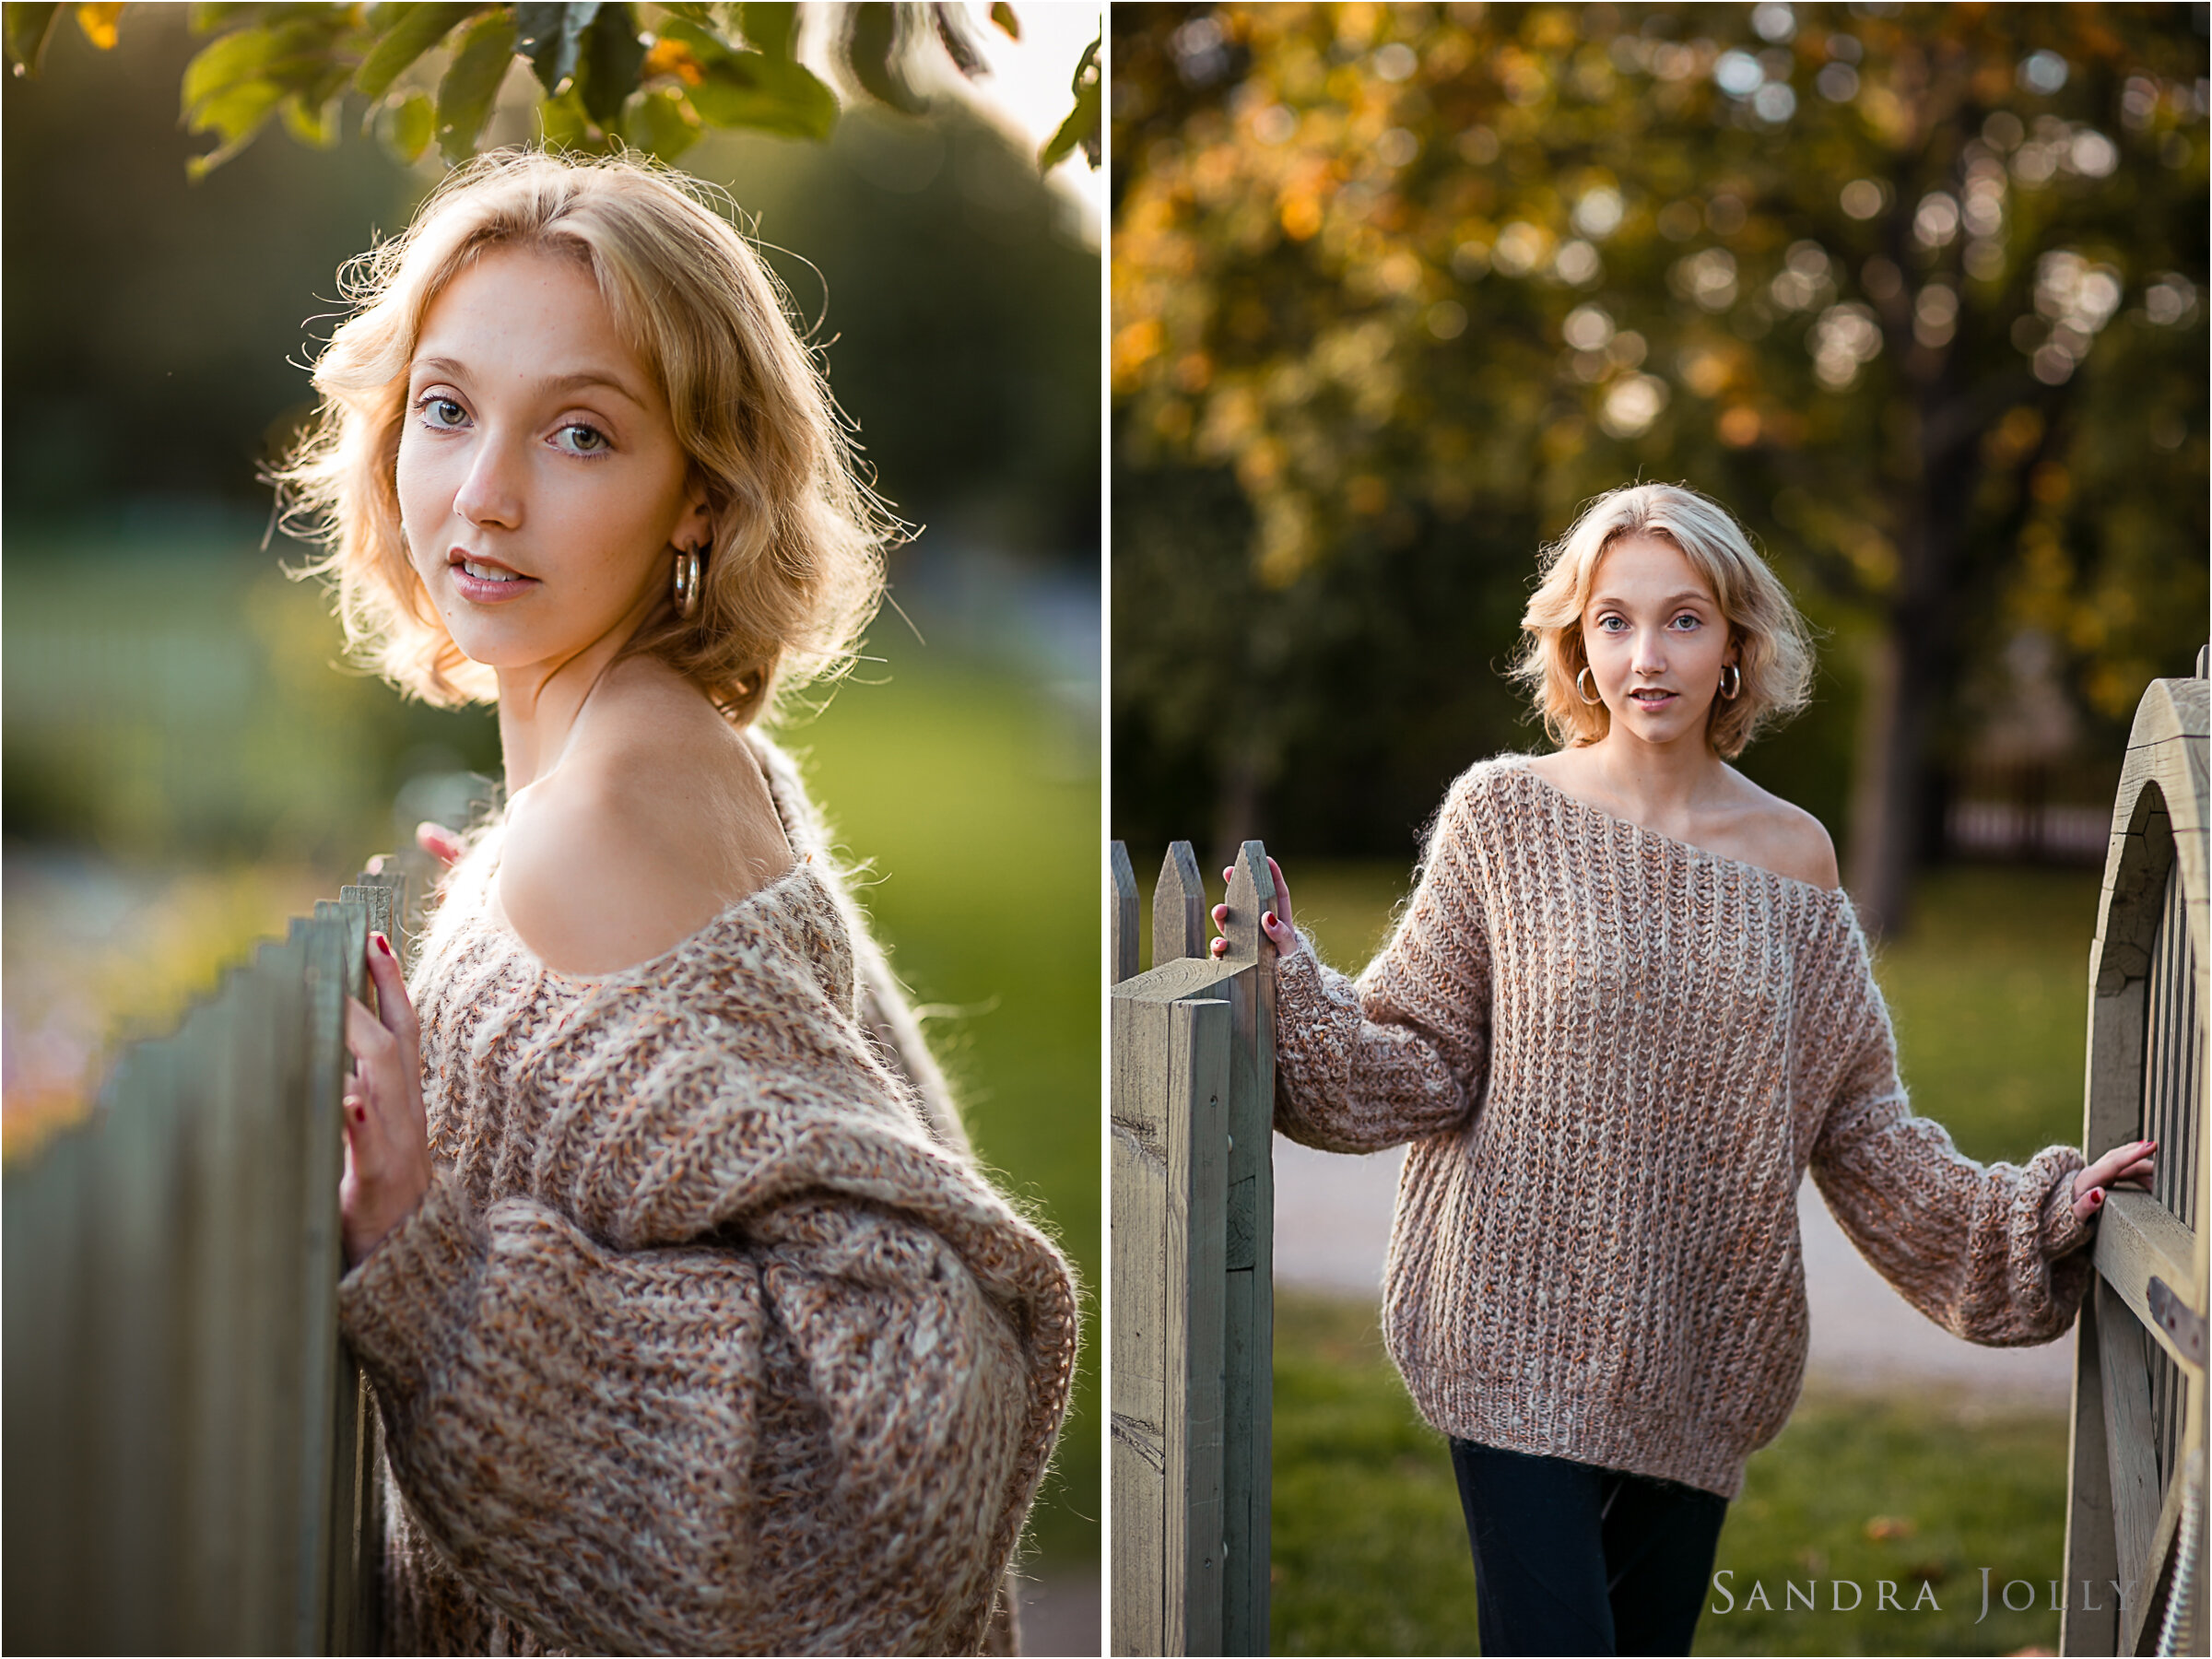 autumn-portrait-session-in-sollentuna-by-sandra-jolly-photography.jpg